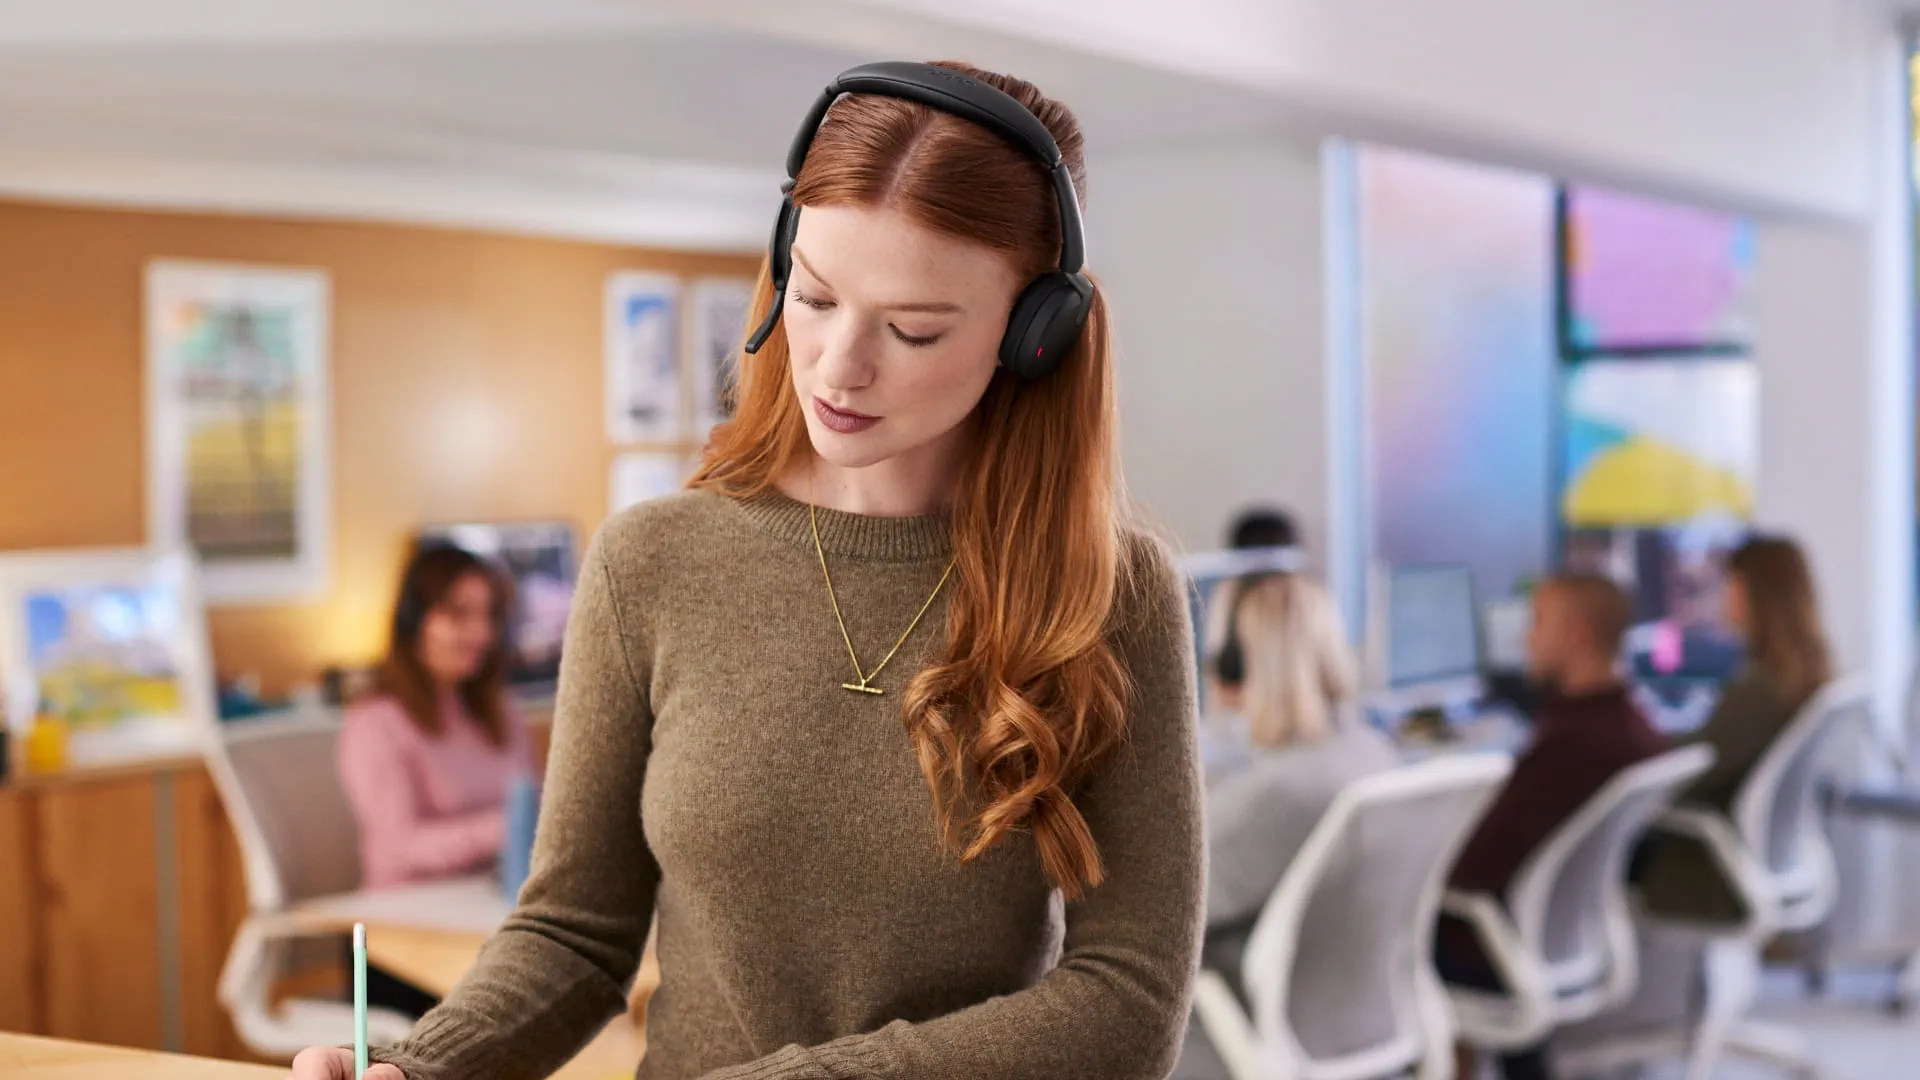 Jabra Evolve2 65 Flex review: Luxurious foldable headset - Can Buy or Not